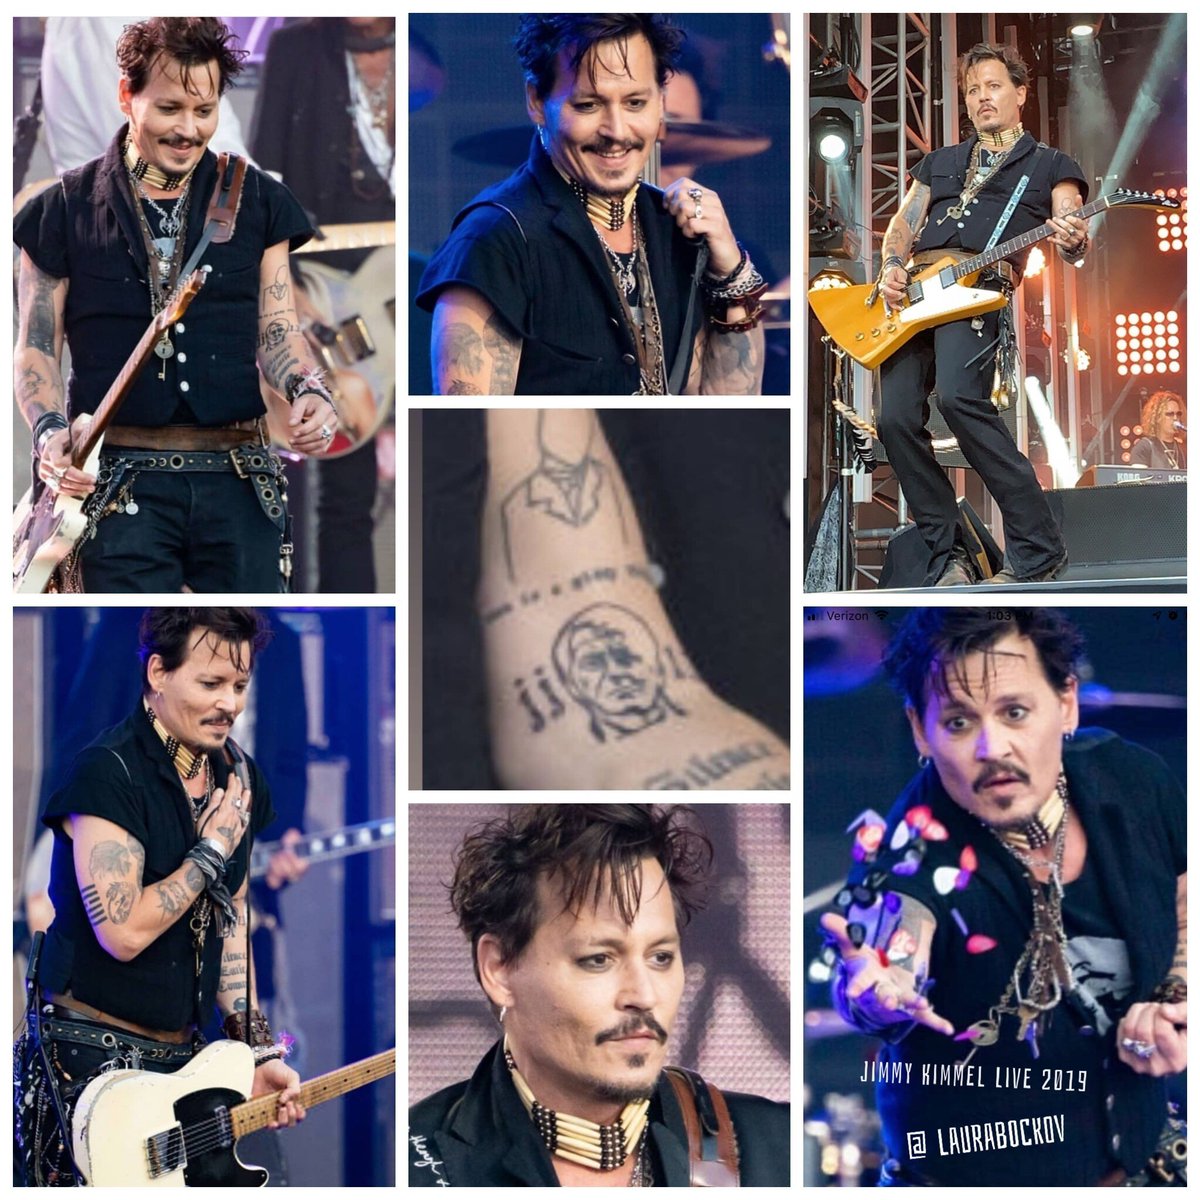 Johnny Depp first love has been music. Here is a thread celebrating the  @hollywoodvamps tours (In No Particular Order - Credit to original owners-sorry I don't have them) 1.... #JusticeForJohnnyDepp  #HappyJohnnyDeppDay